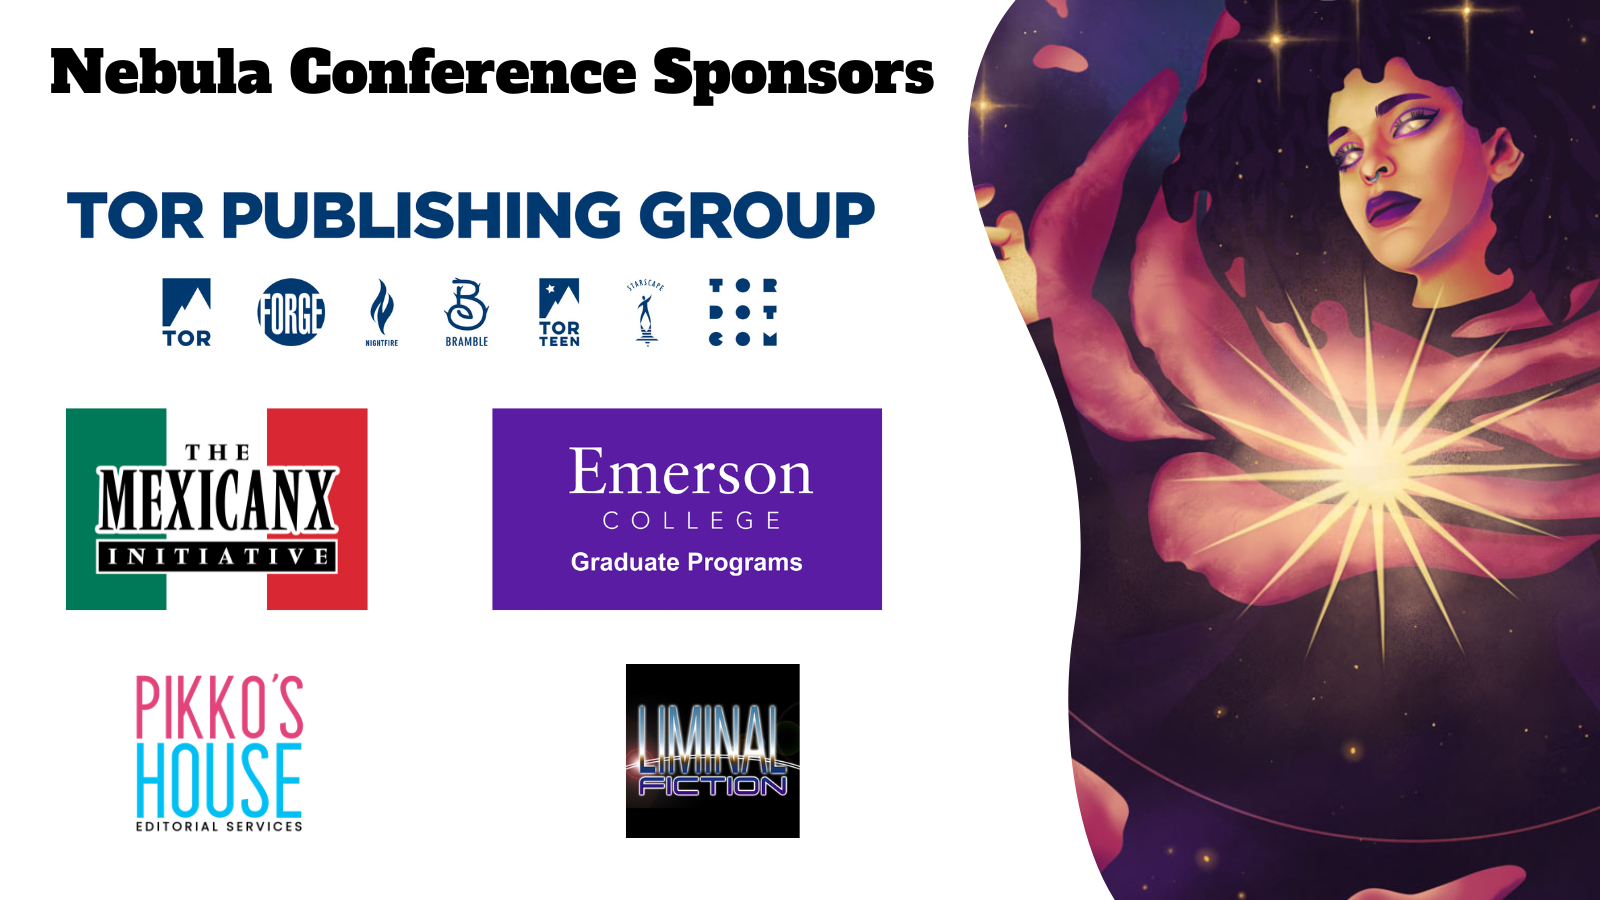 Graphic showing the conference sponsors: Tor Publishing Group, The Mexicanx Initiative, Emerson College Graduate Programs, Pikko's House Editorial Services, and Liminal Fiction